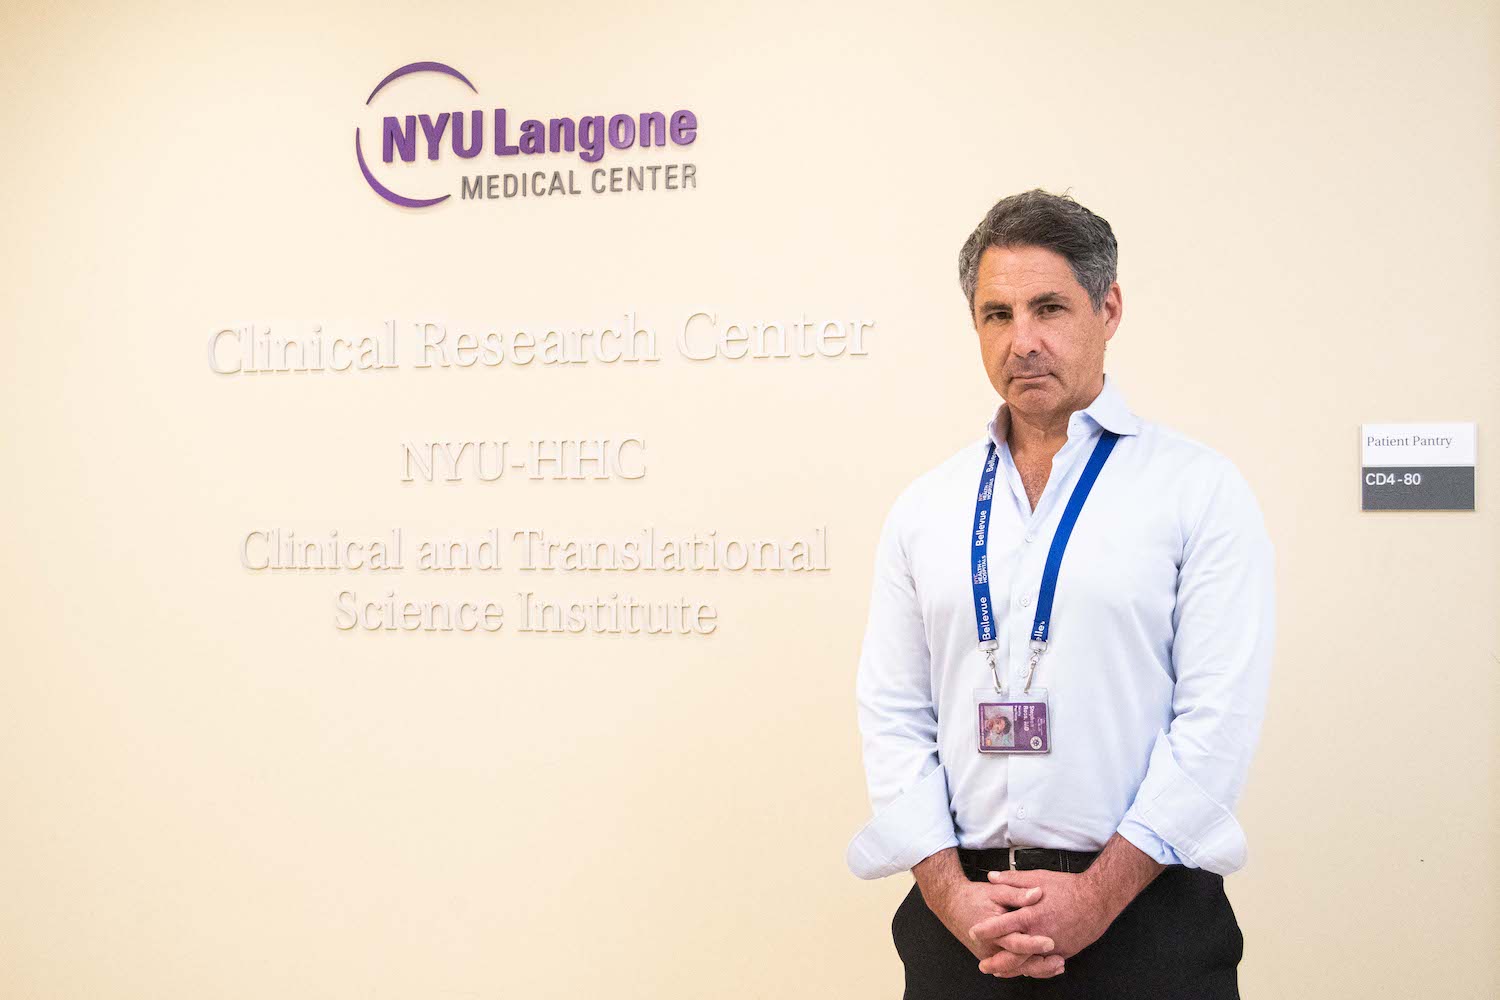 A man wearing a light blue dress shirt and a lanyard around his neck holding an N.Y.U. I.D. stands with his hands clasped in front of him. He is looking into the camera. Behind him is a sign that reads, “N.Y.U. Langone Medical Center,” “N.Y.U. H.H.C.,” “Clinical and Translational Science Institute” and “Clinical Research Center.”